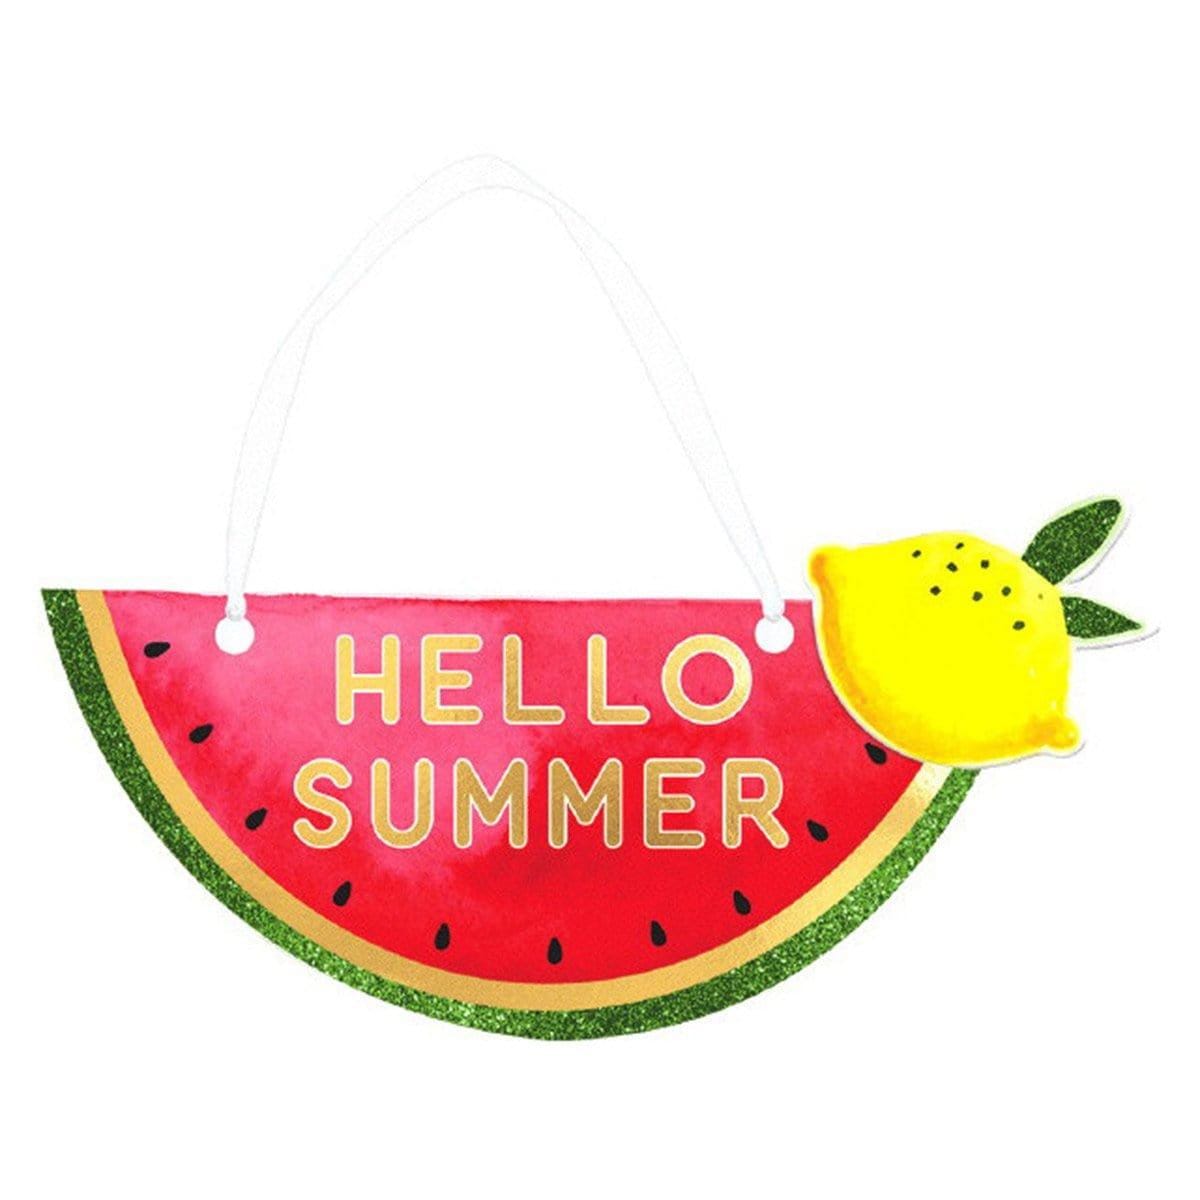 Buy Summer Tutti Frutti watermelon sign sold at Party Expert